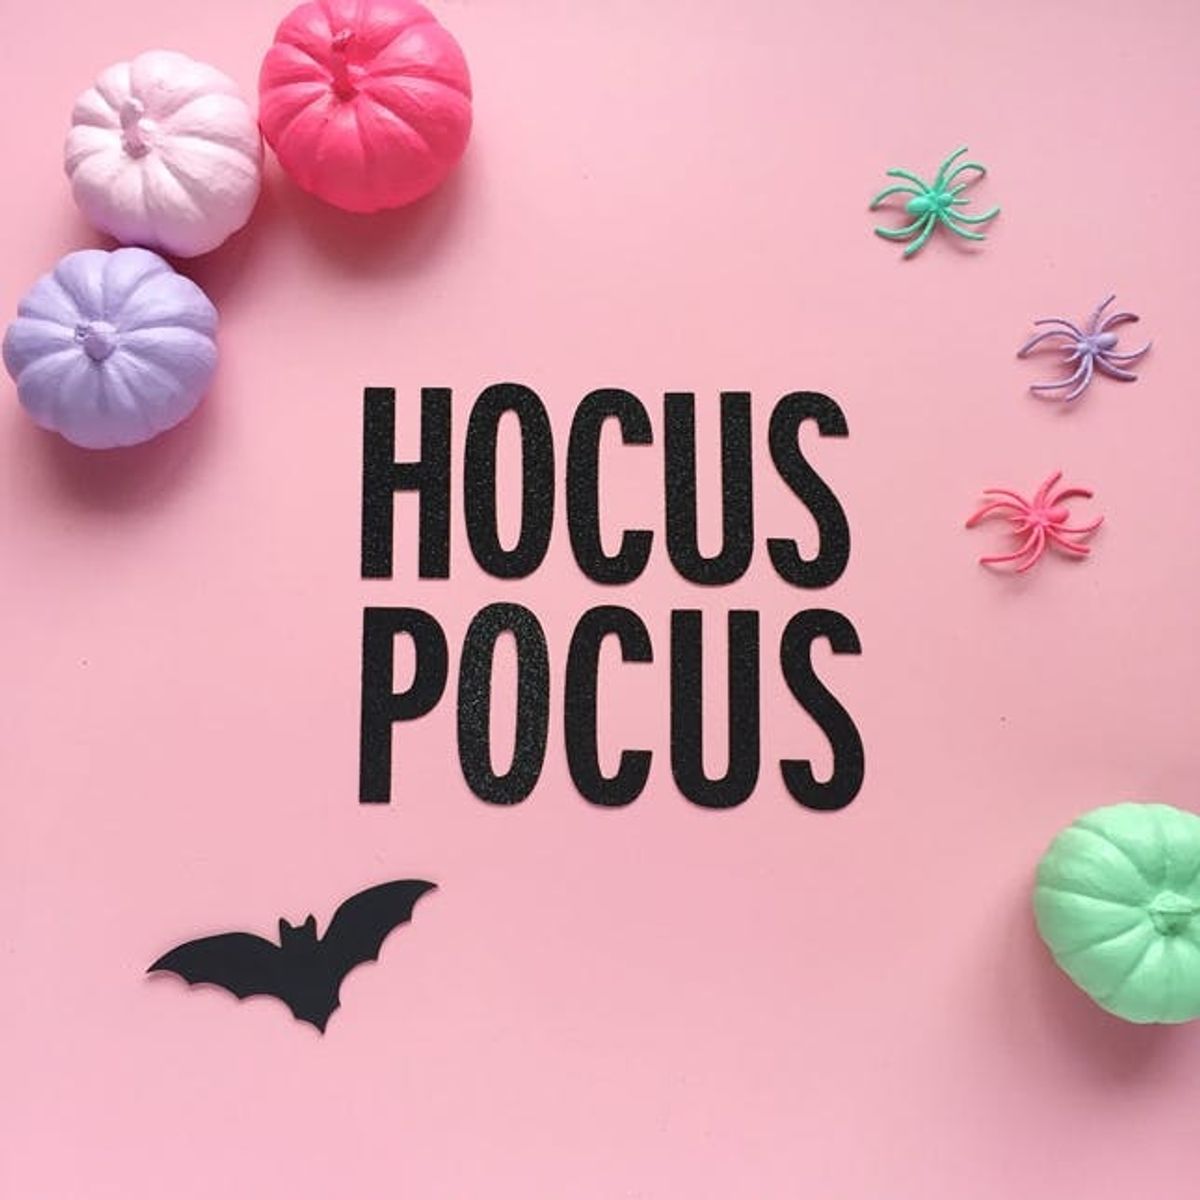 14 Things All ‘Hocus Pocus’ Fangirls Need in Their Lives